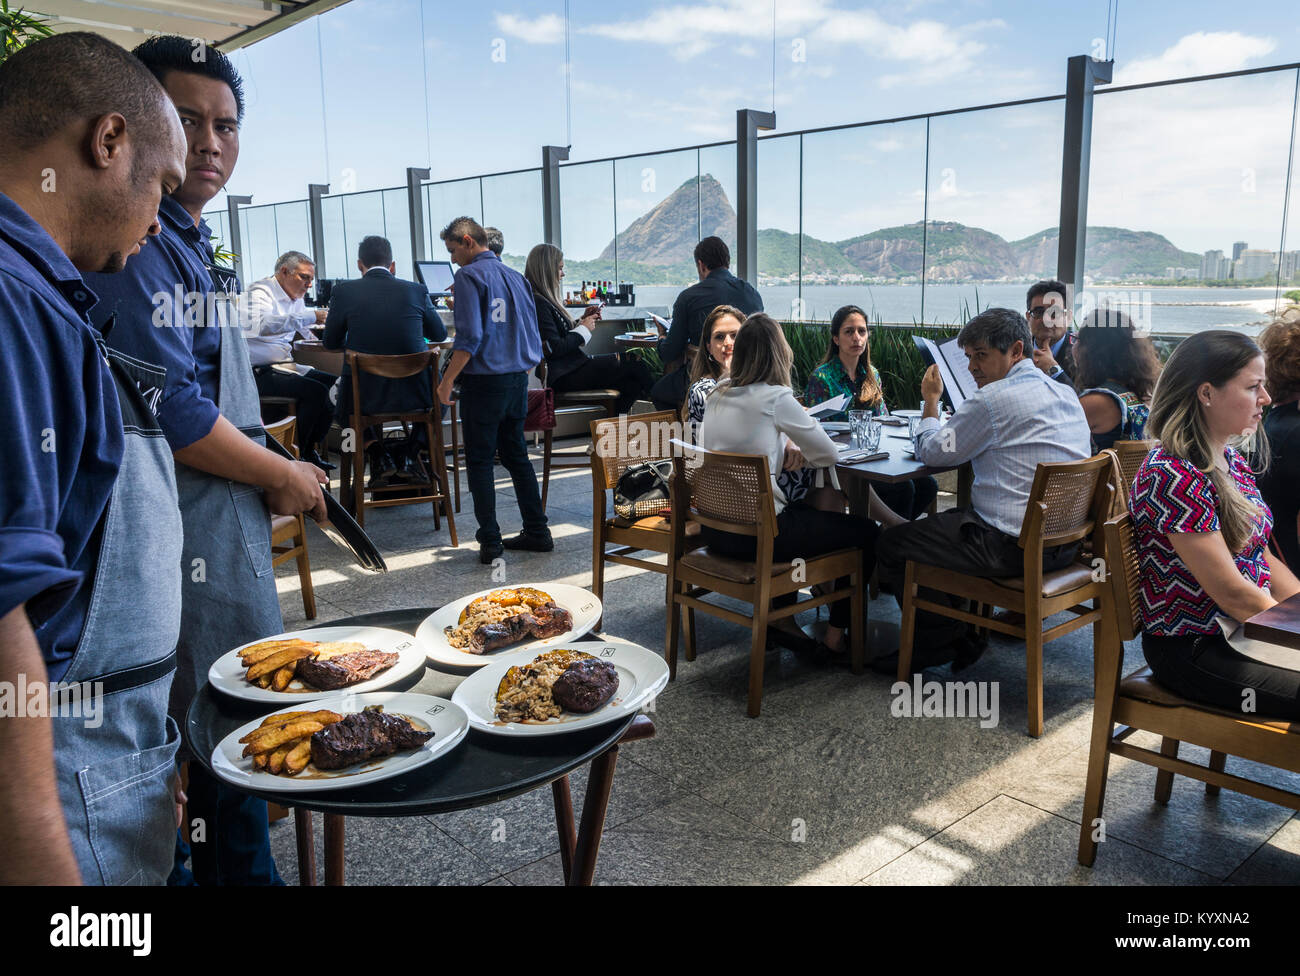 Brazilian churrasco at restaurant with a view Stock Photo